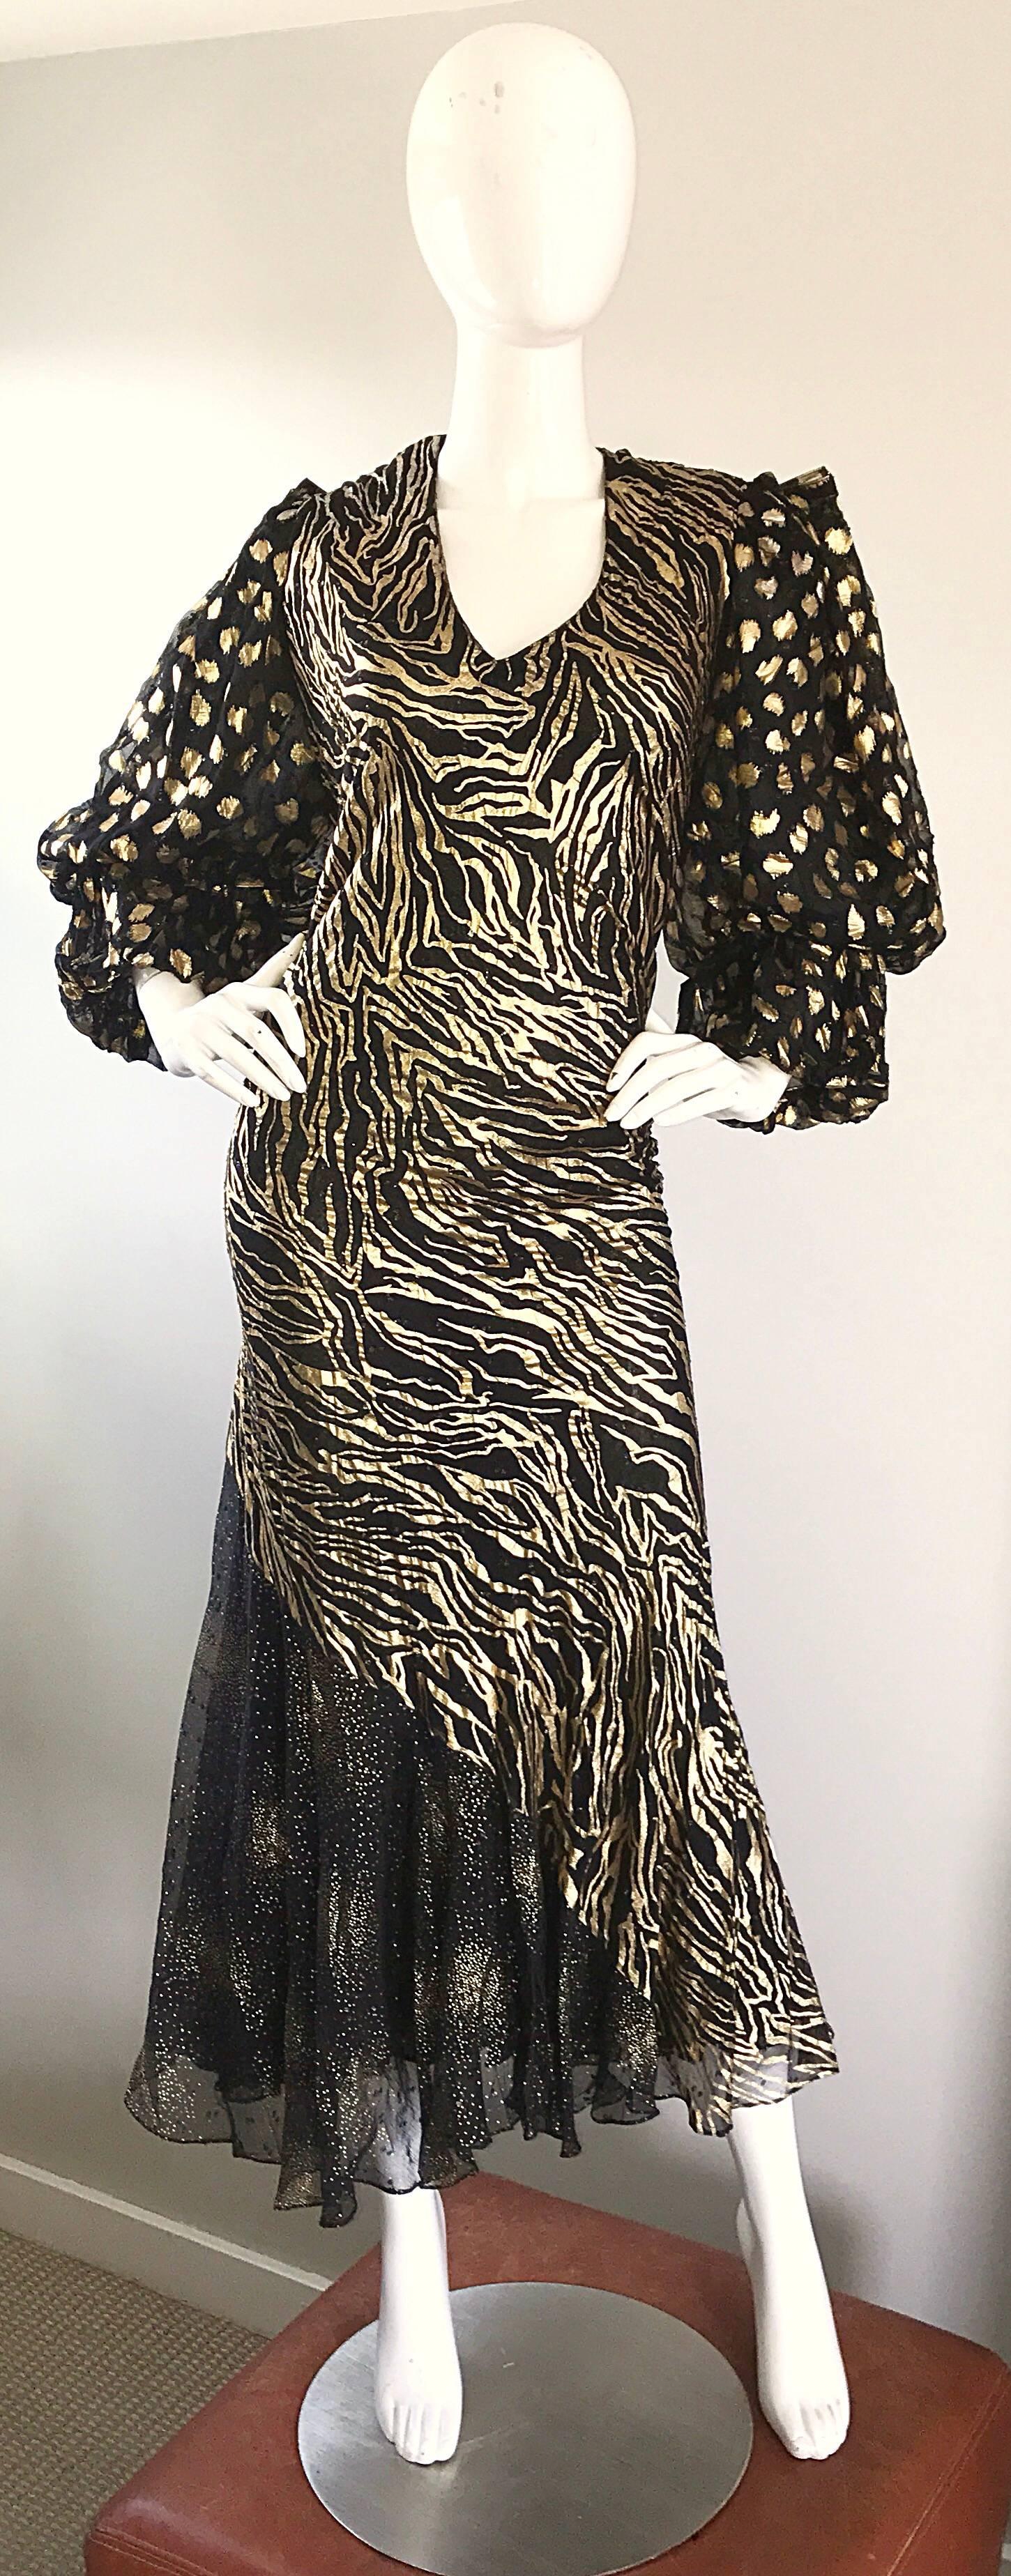 Rare hard to find plus size vintage JUDY HORNBY Couture gold and black hand painted zebra and leopard print bishop sleeve silk mermaid hem gown! Features a v-neckline. Handpainted metallic gold and black zebra print on the bodice and skirt.